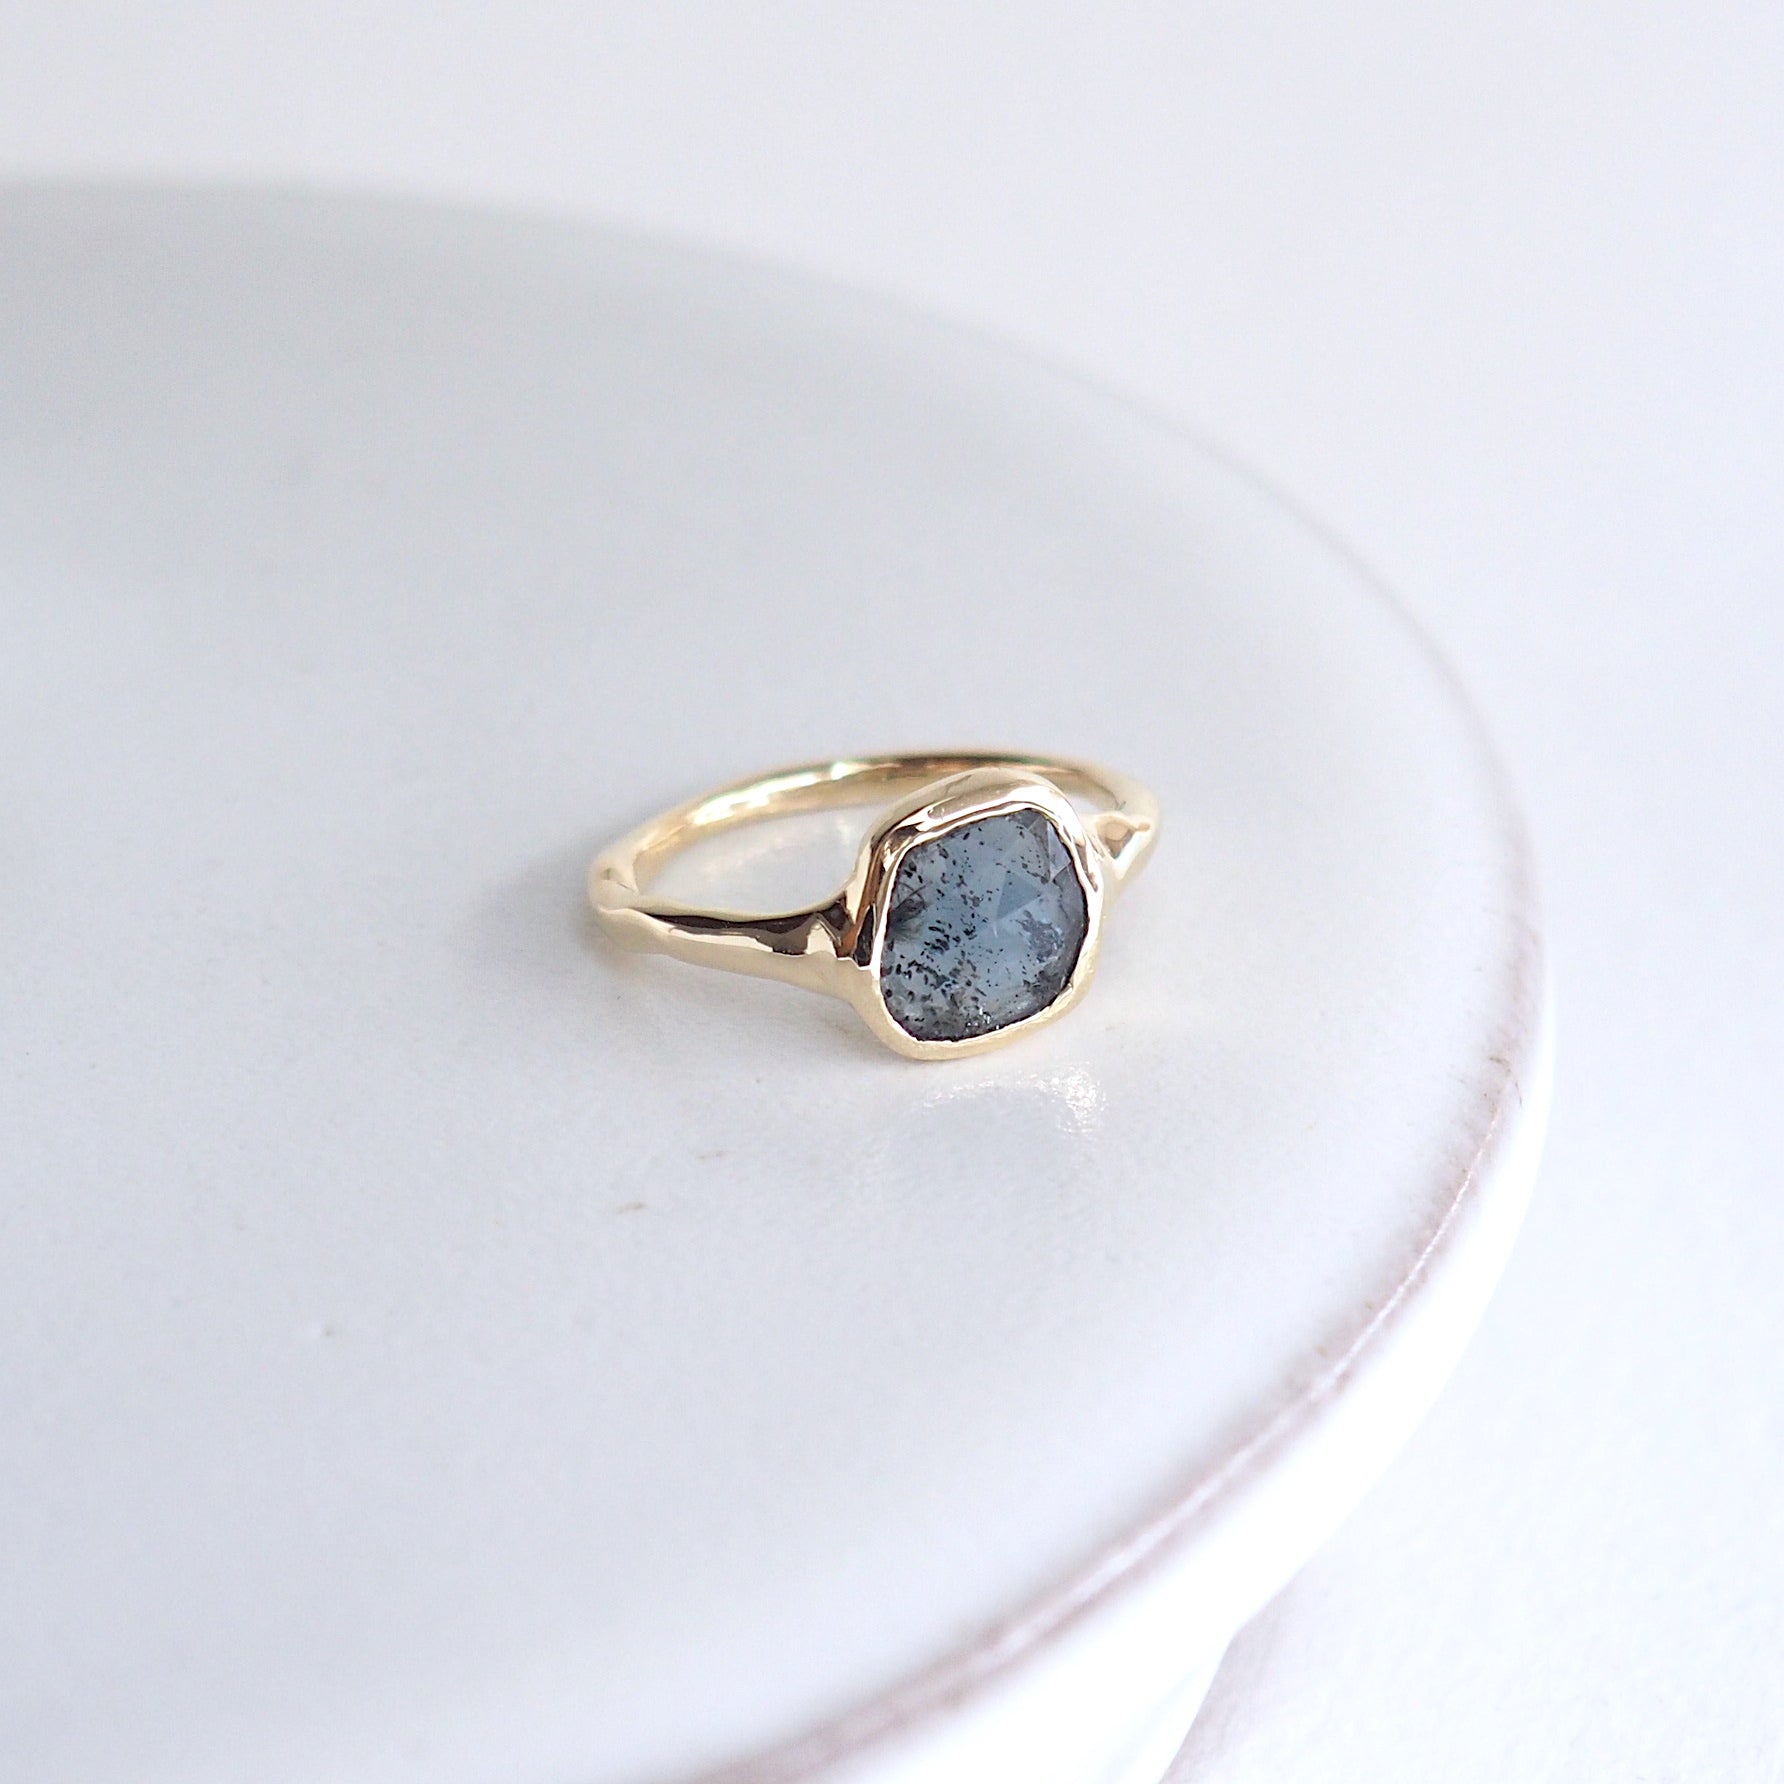 Ring Solid gold 9kt kyanite stone organic jewellery jewelry design custom made handcrafted